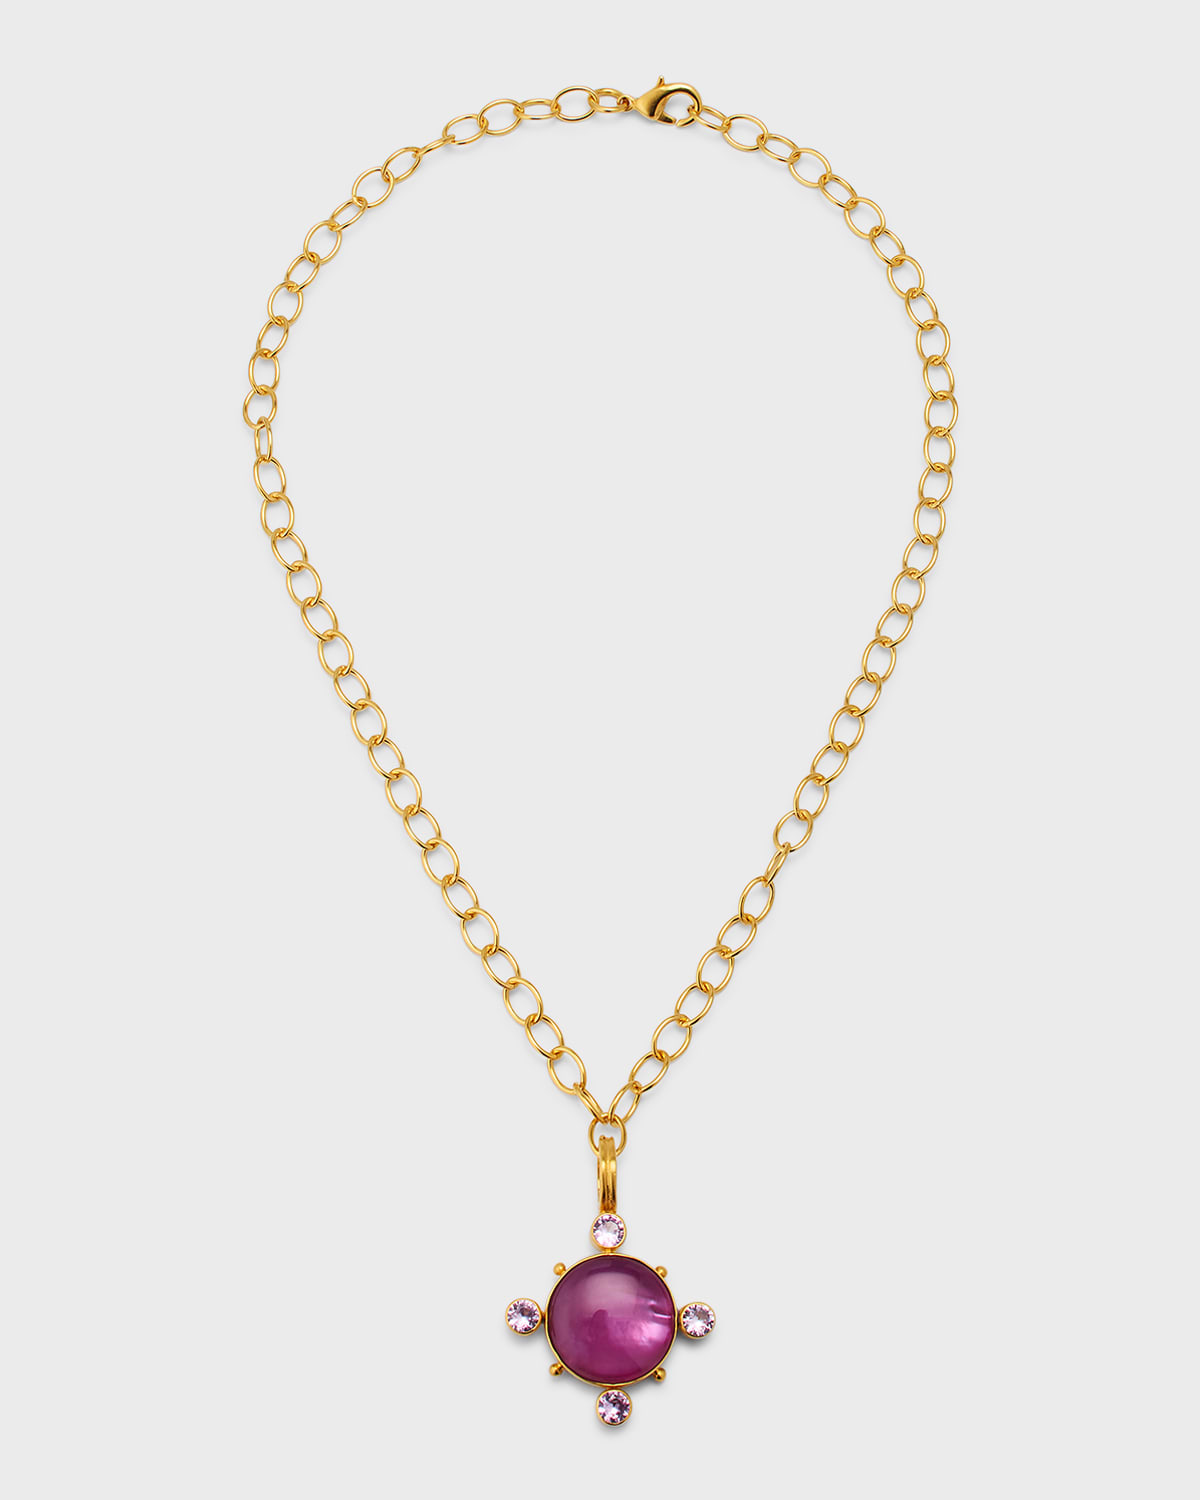 Dina Mackney Pink Doublet Necklace With Sapphire Accents